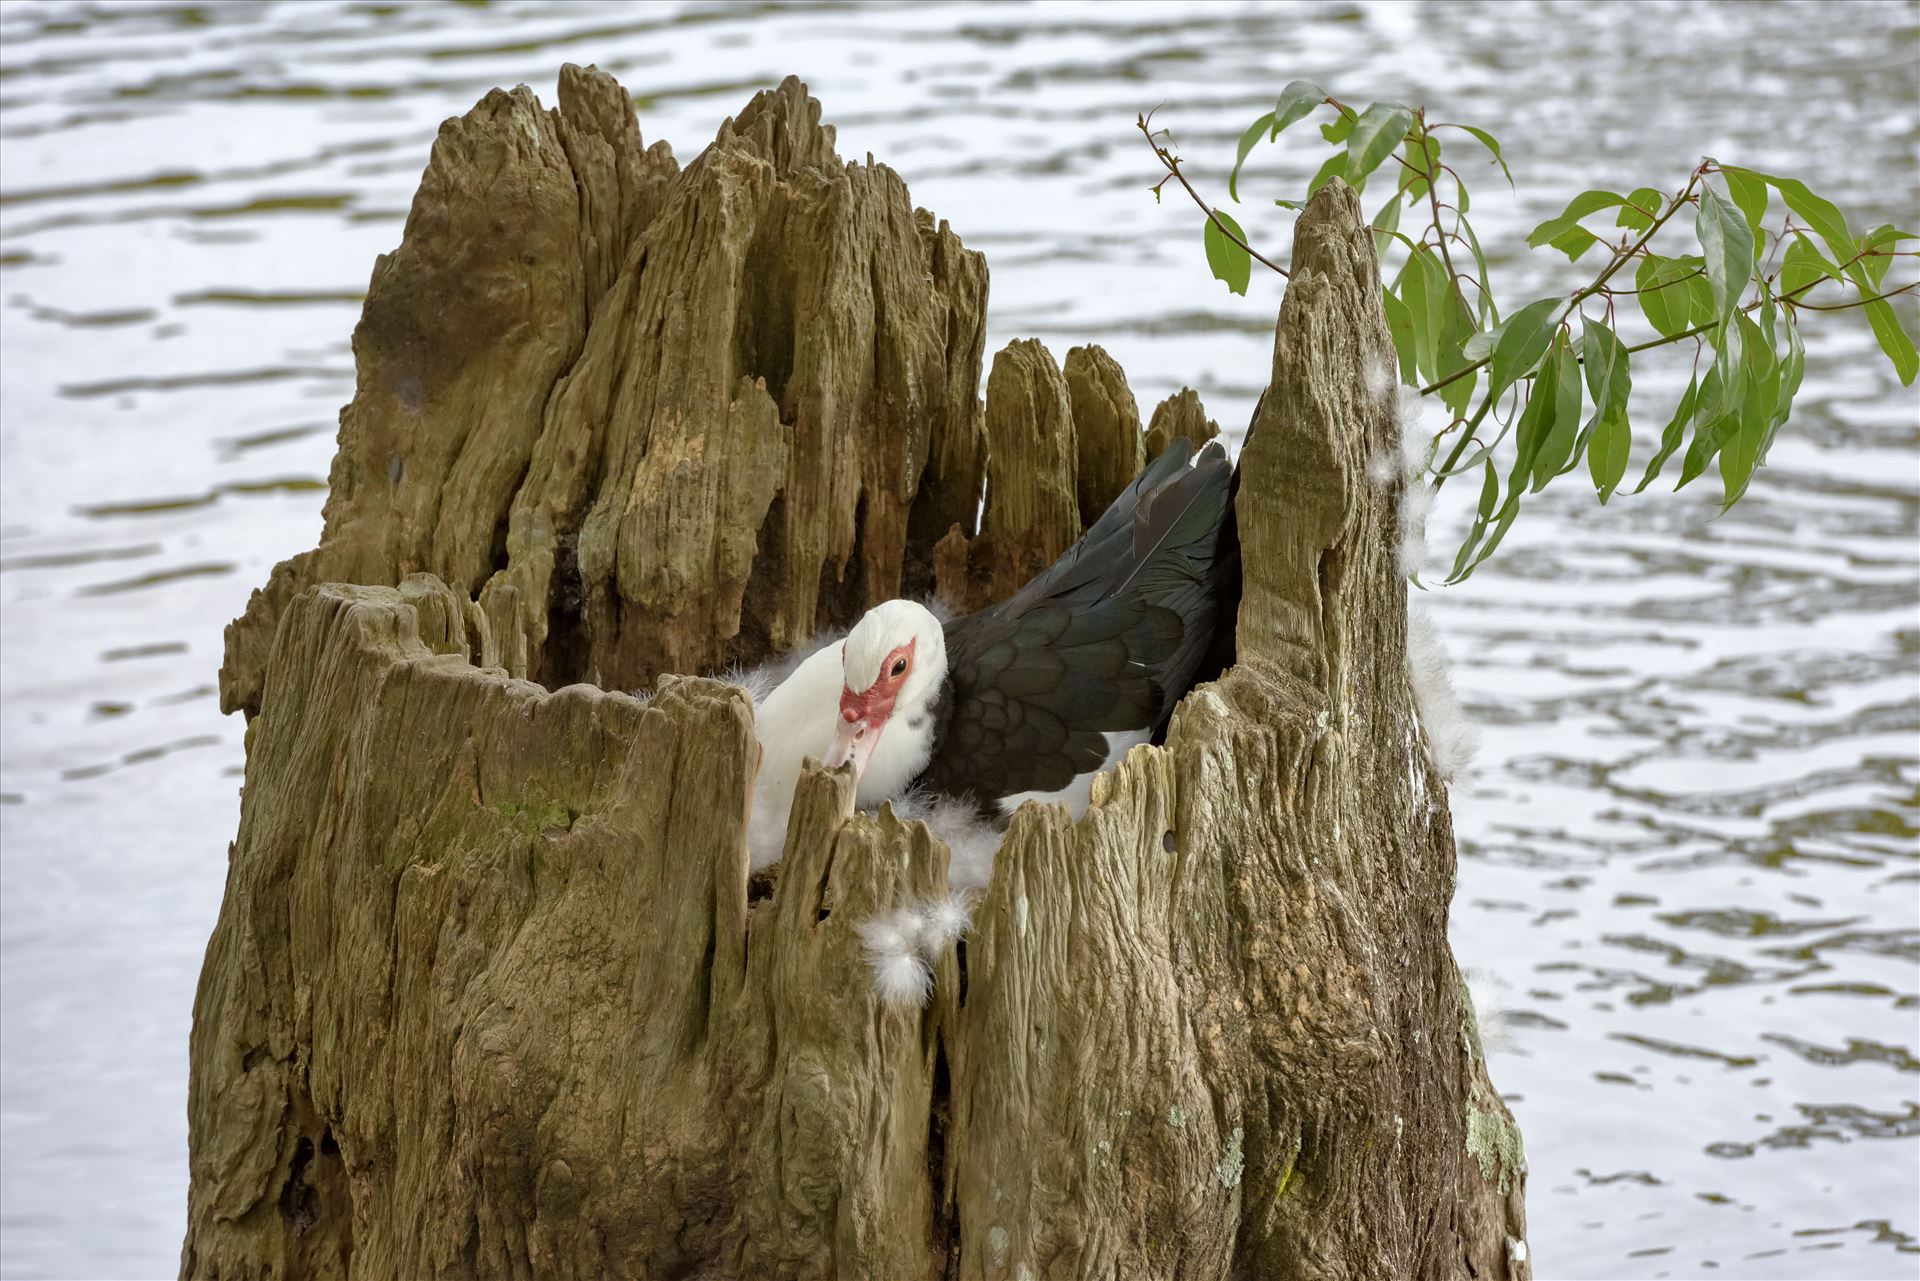 duck sitting on eggs in hollowed out tree stump lake caroline ss alamy 8106732.jpg  by Terry Kelly Photography